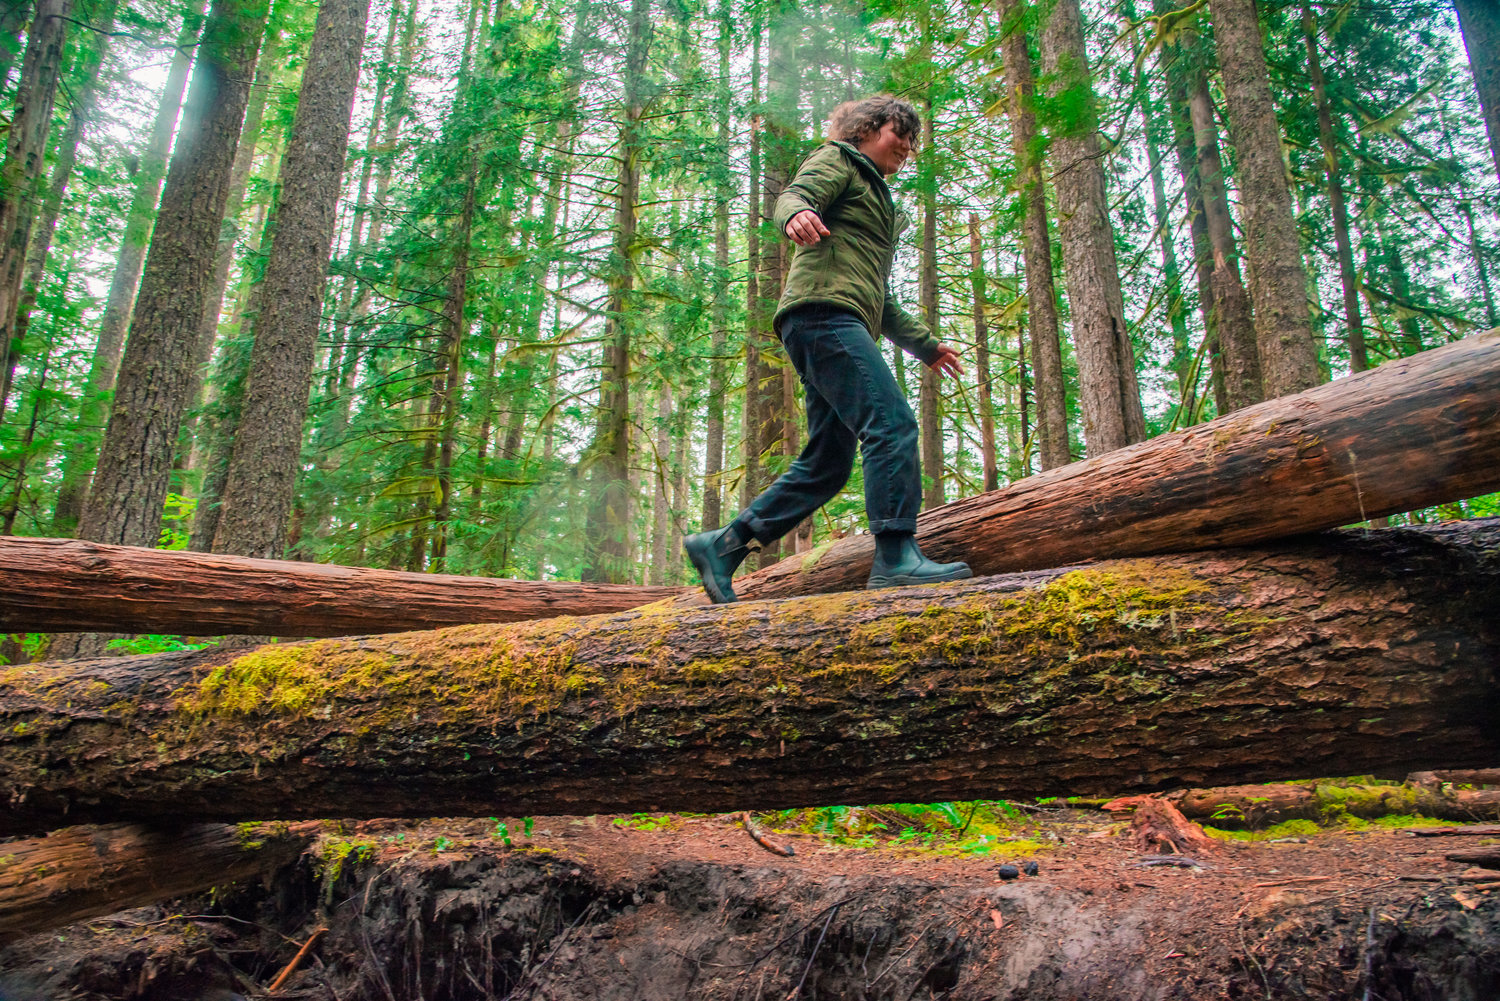 Chronicle reporter Claudia Yaw walks along fallen trees last week at the Trail of Two Forests.